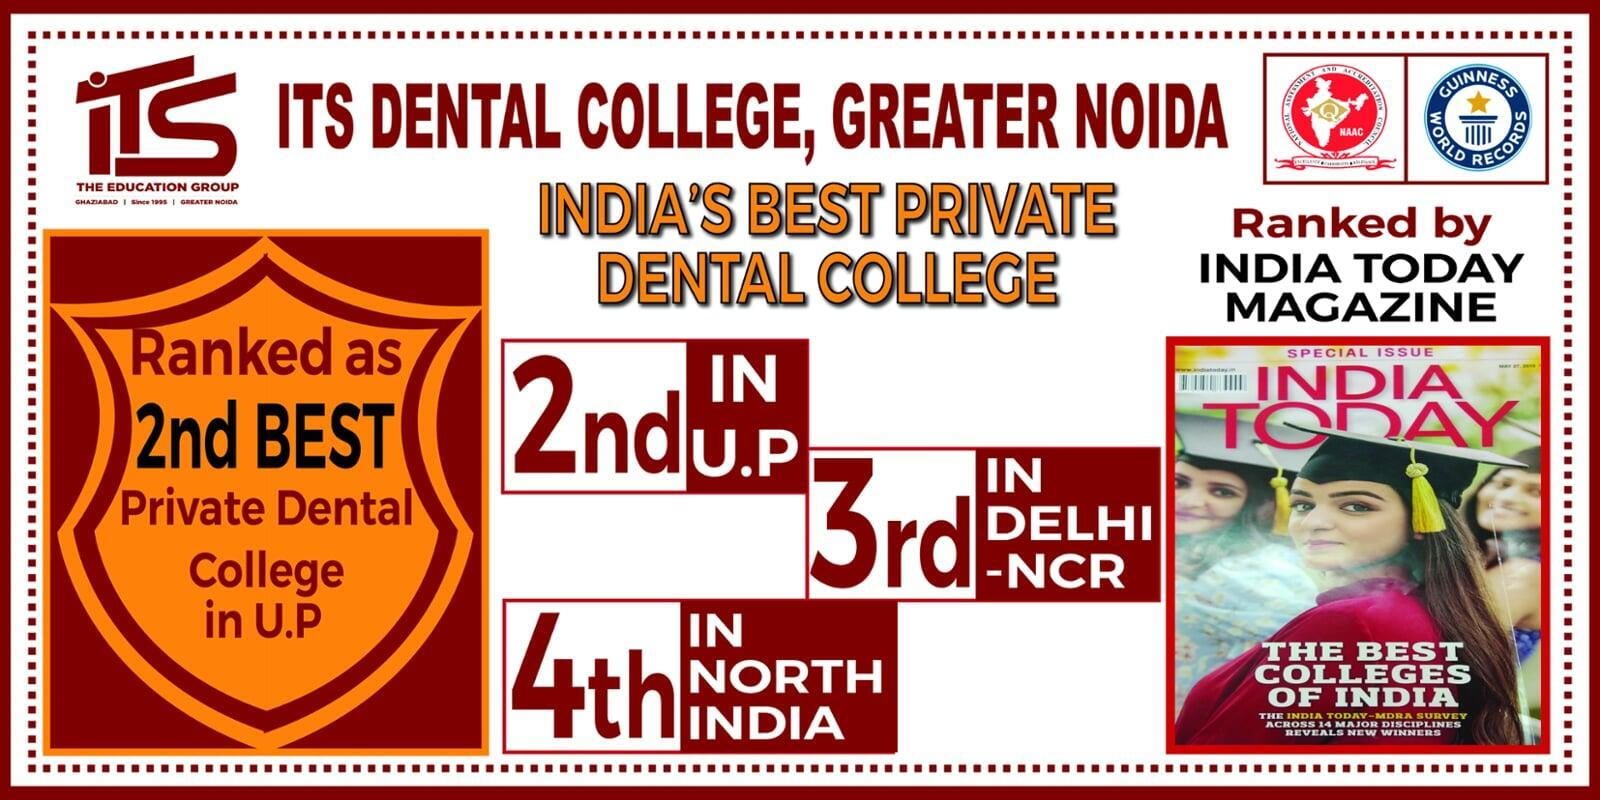 ITS DENTAL COLLEGE INDIA TODAY